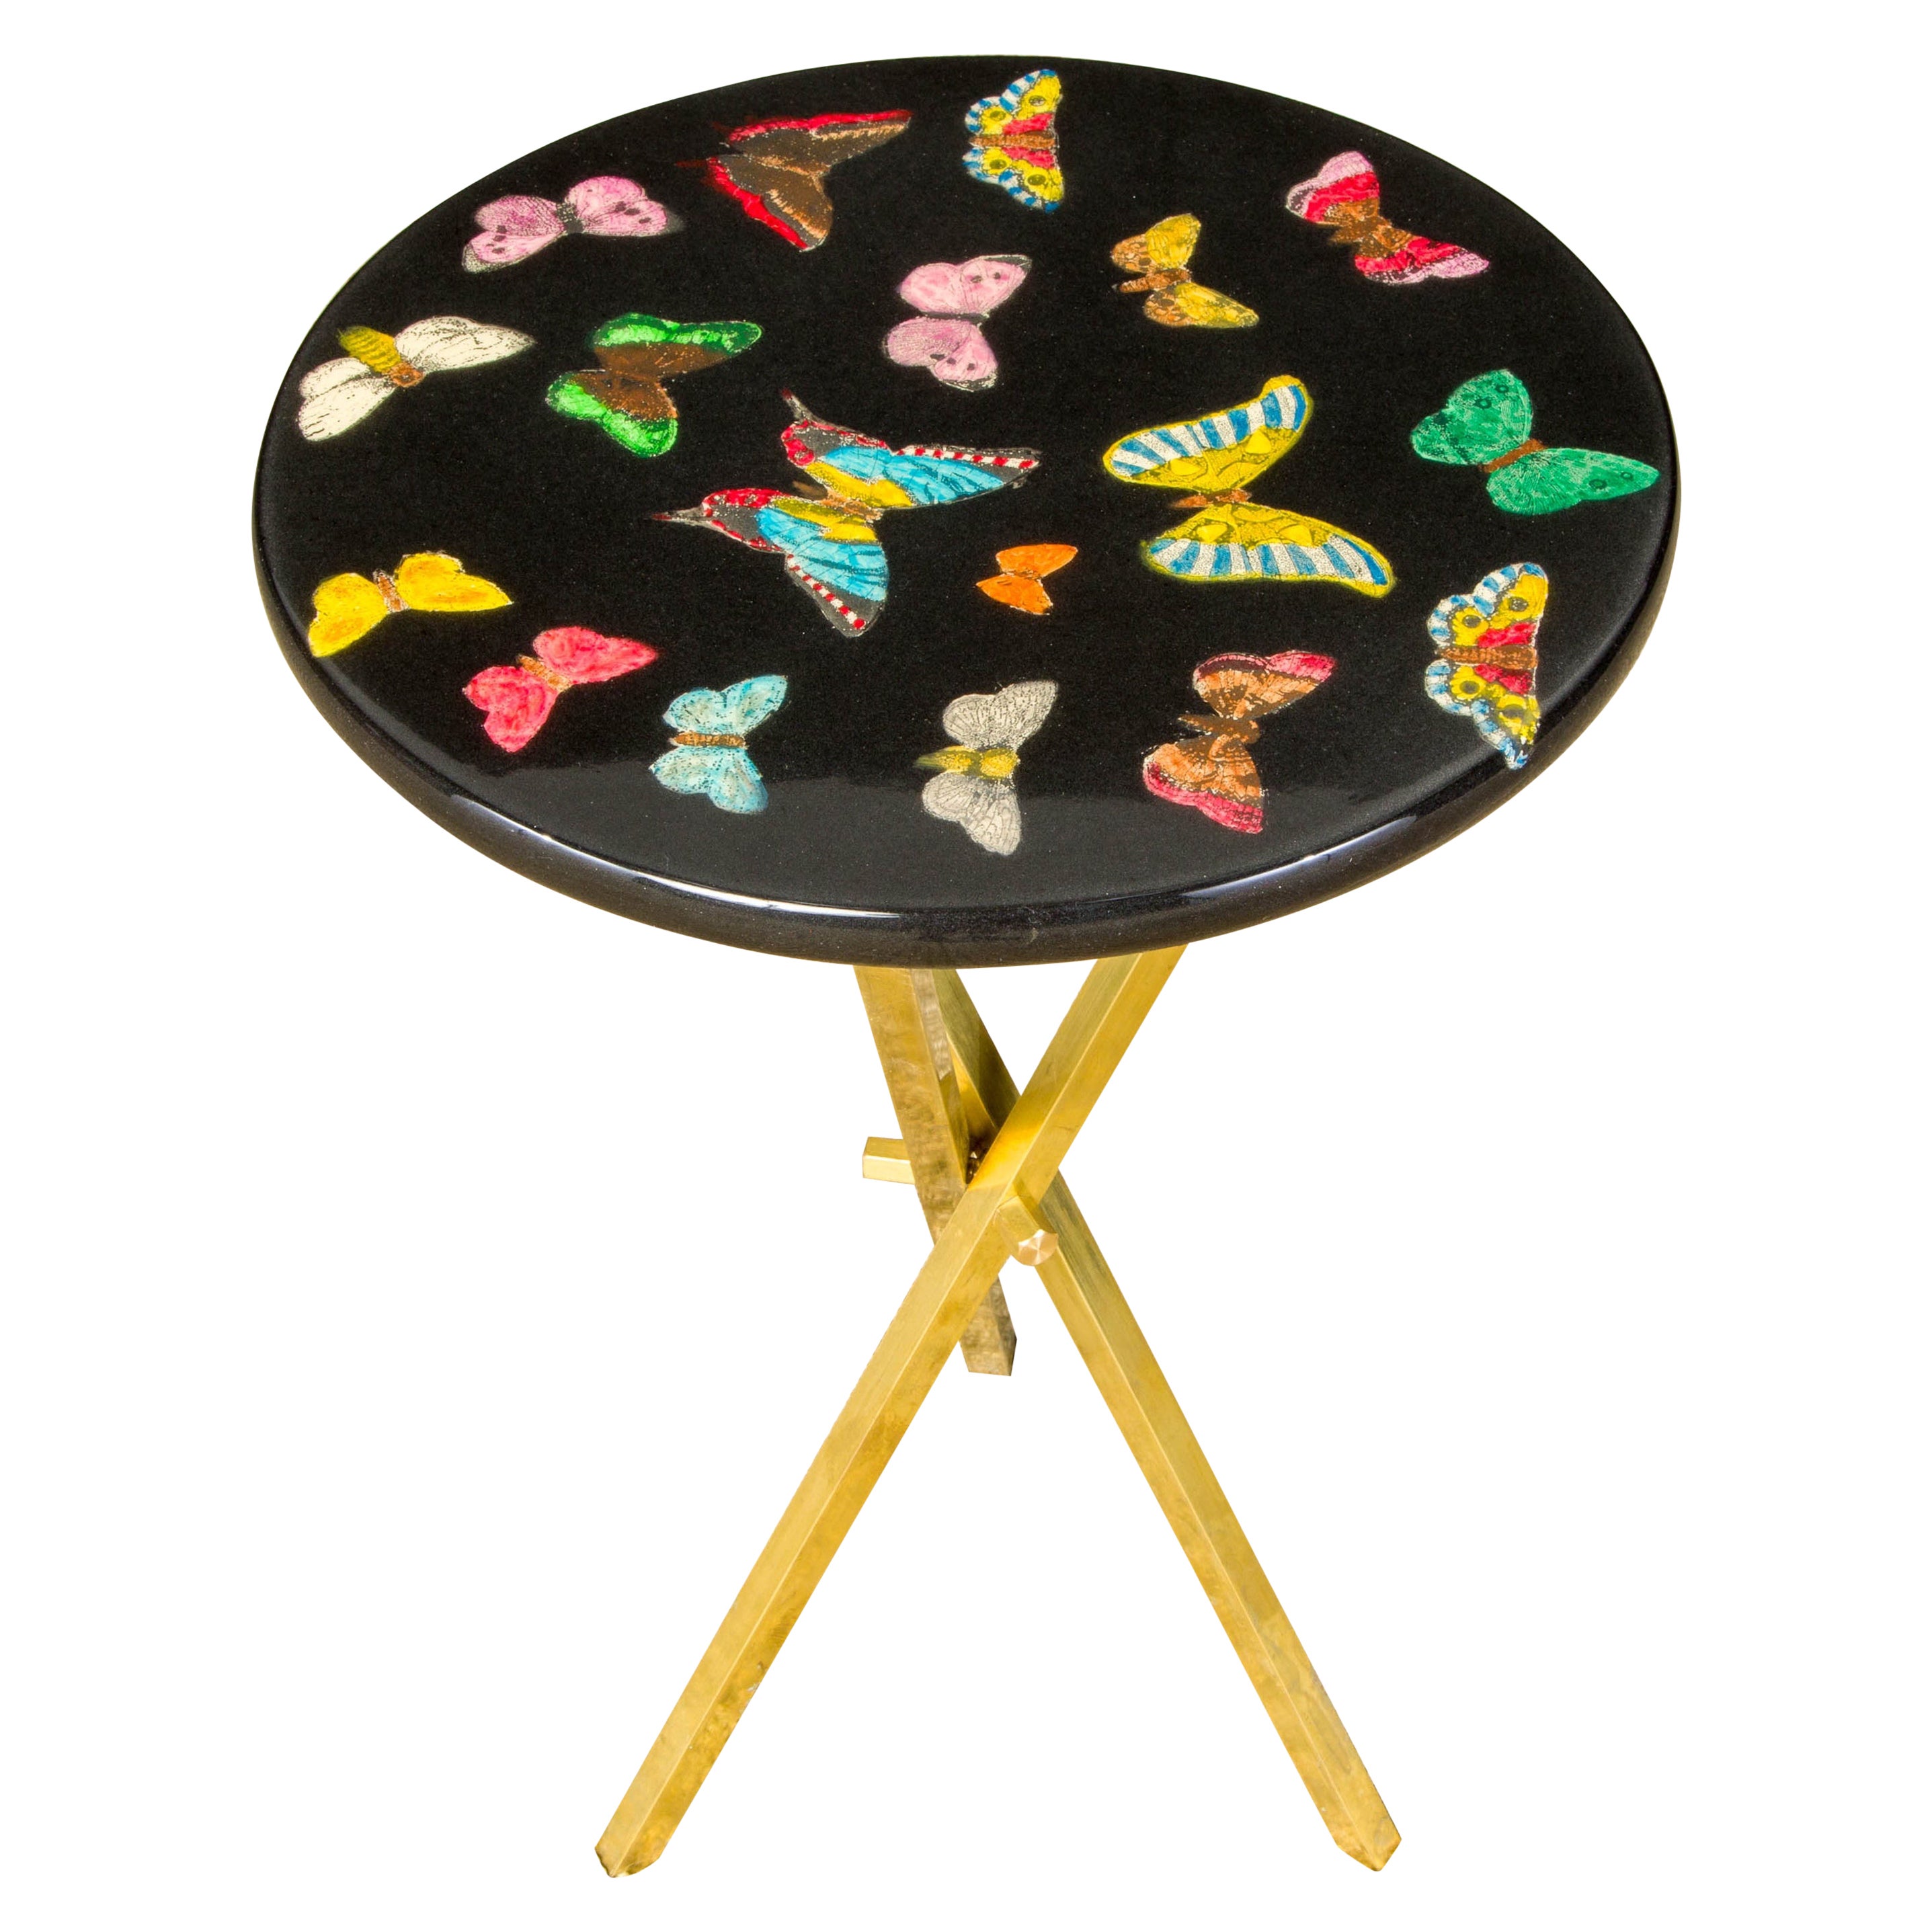 'Butterflies' Drinks Table / Side Table by Piero Fornasetti, Signed 